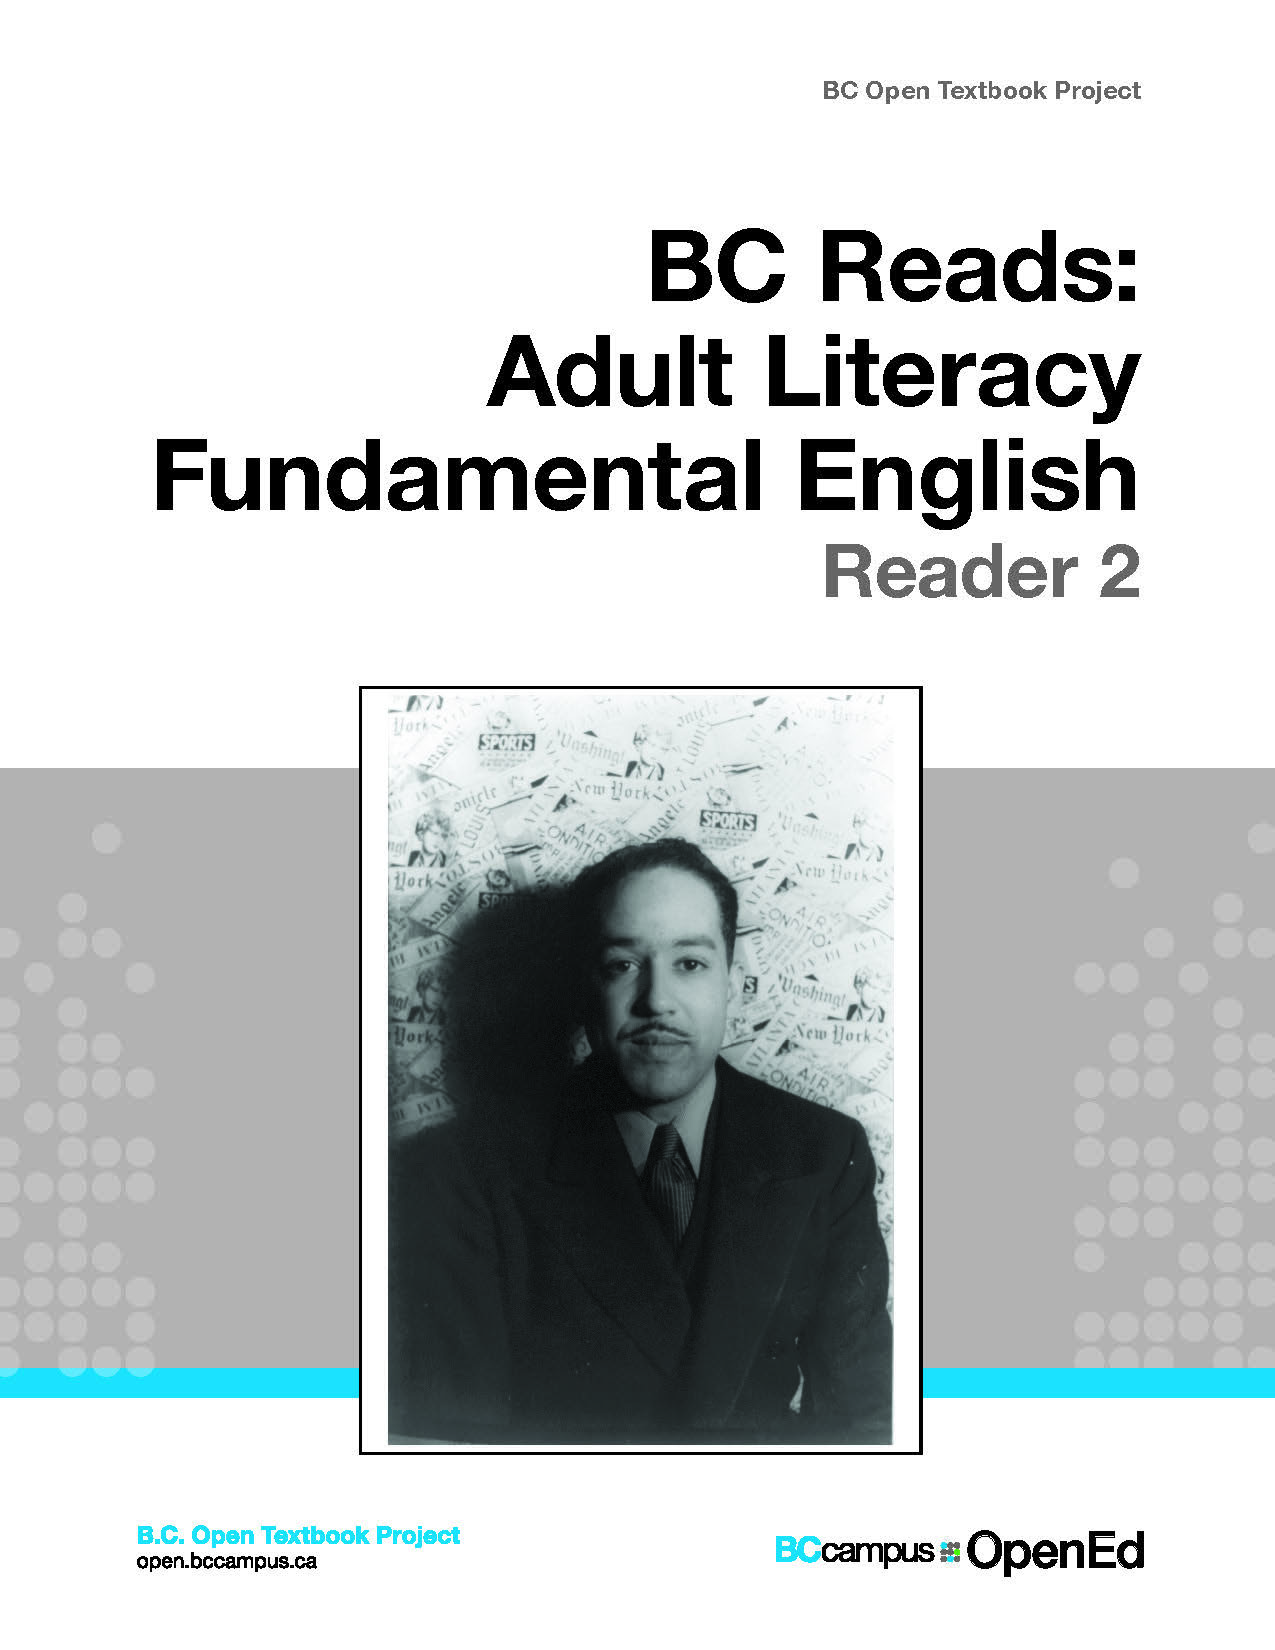 Cover image for Adult Literacy Fundamental English - Reader 2